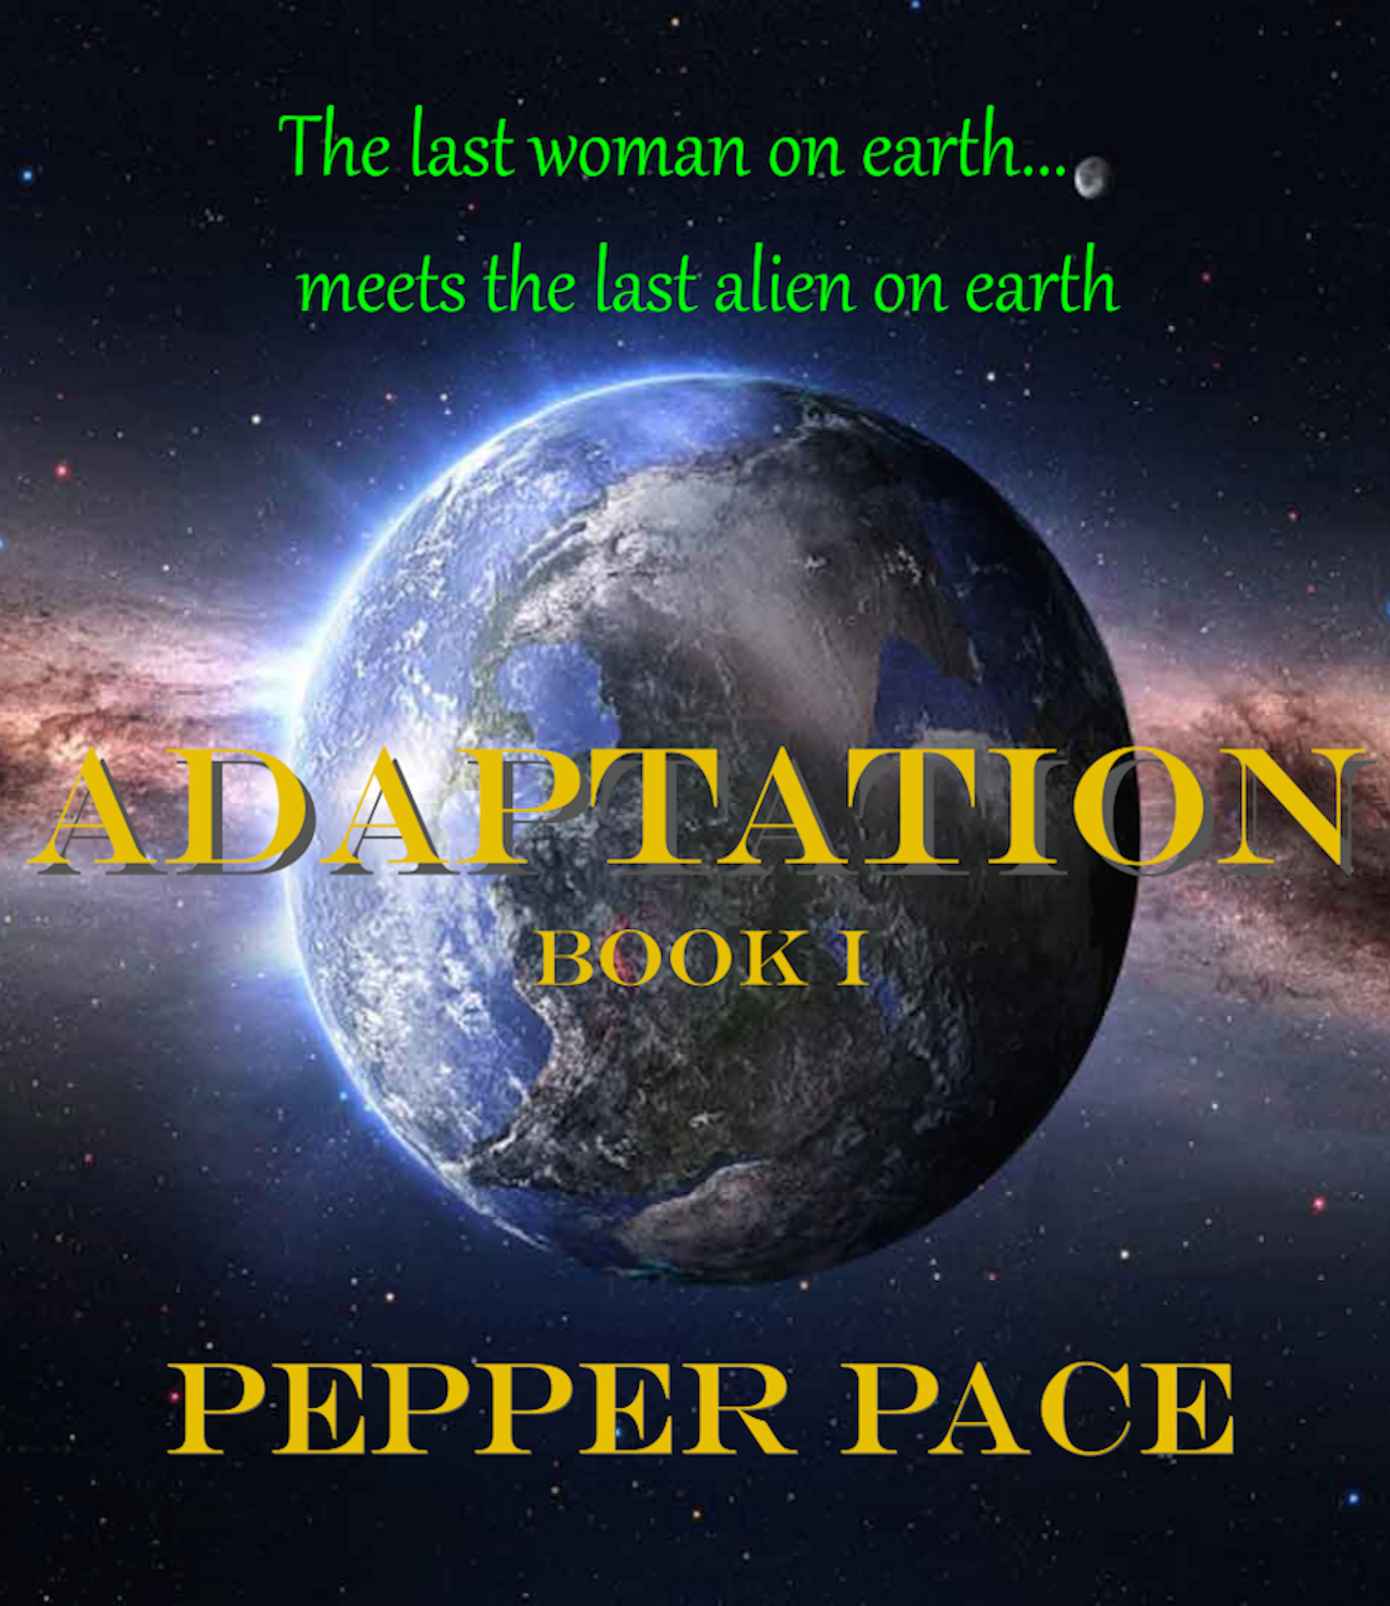 Adaptation: book I by Pepper Pace